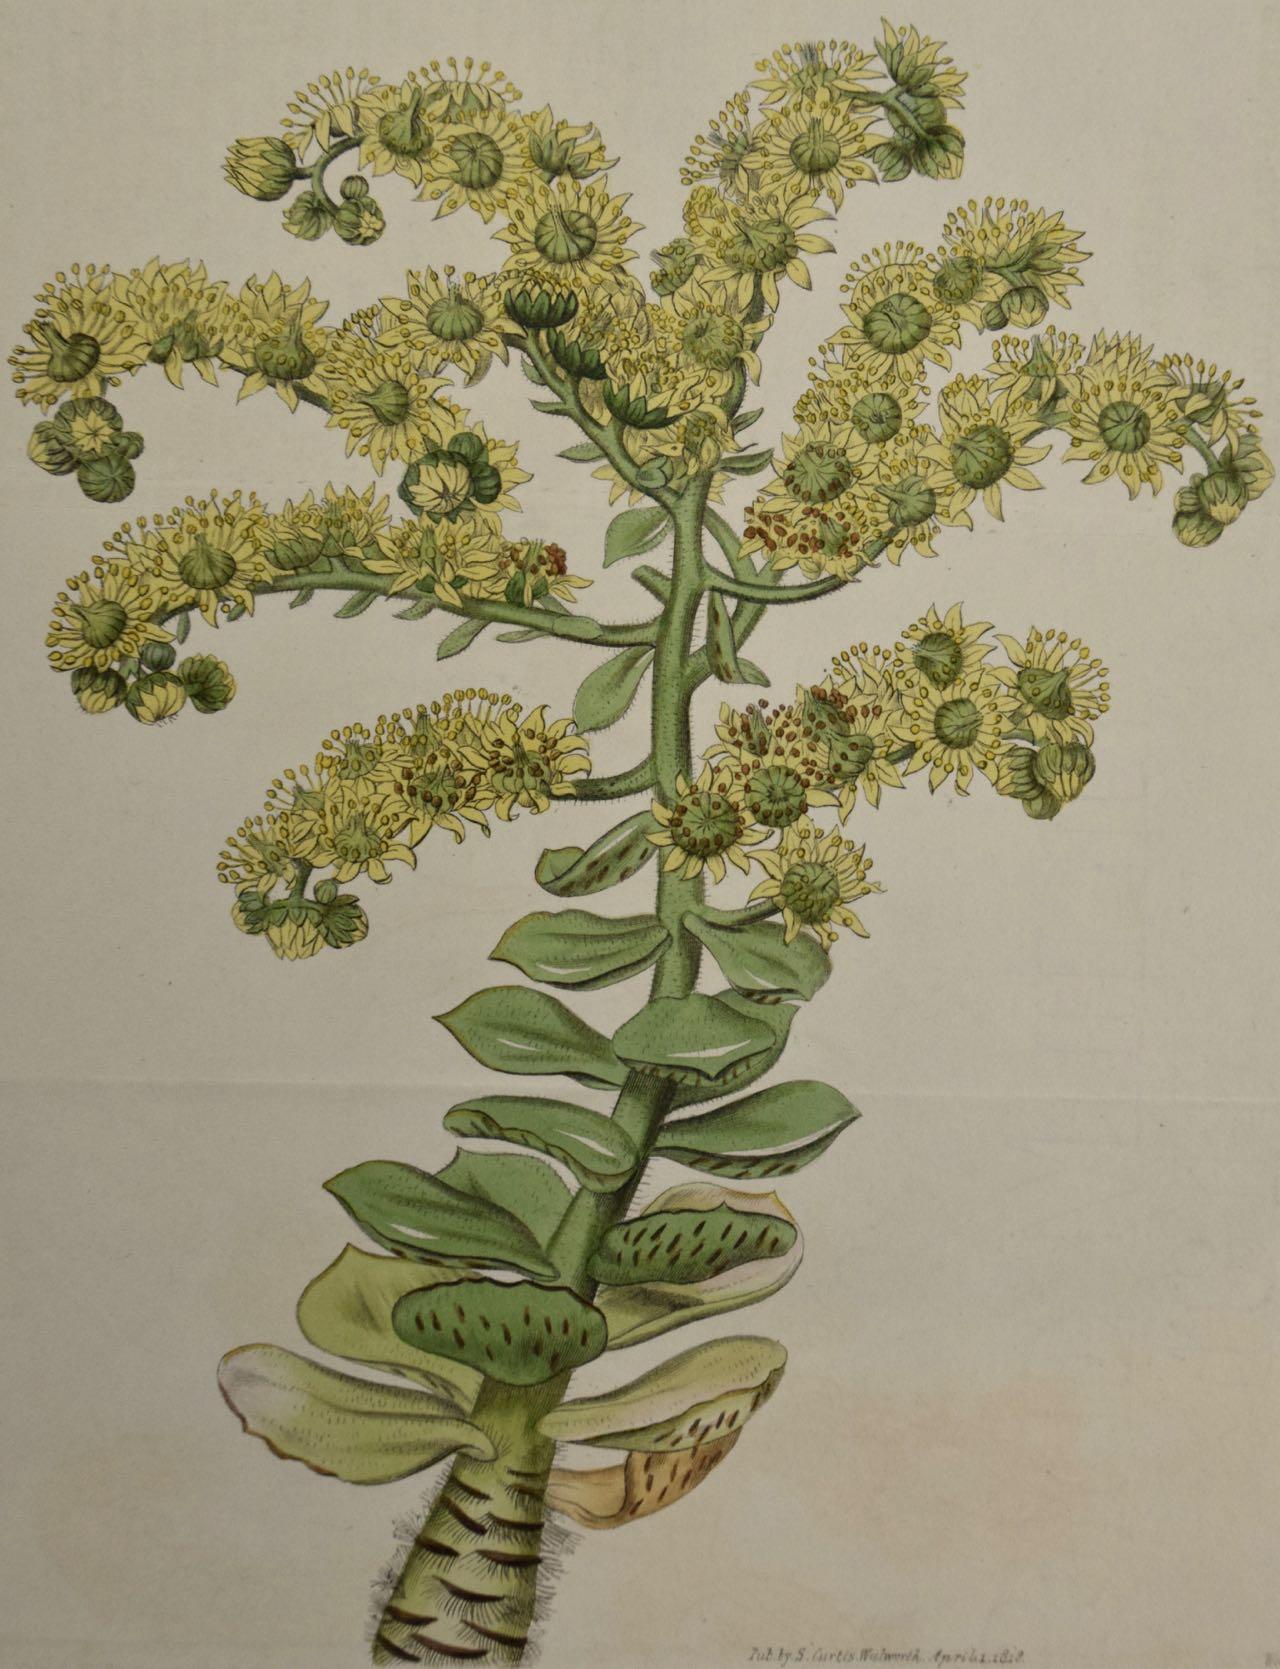 Flowering Houseleek Plant: A 19th C. Hand-colored Botanical Engraving by Curtis - Print by William Curtis